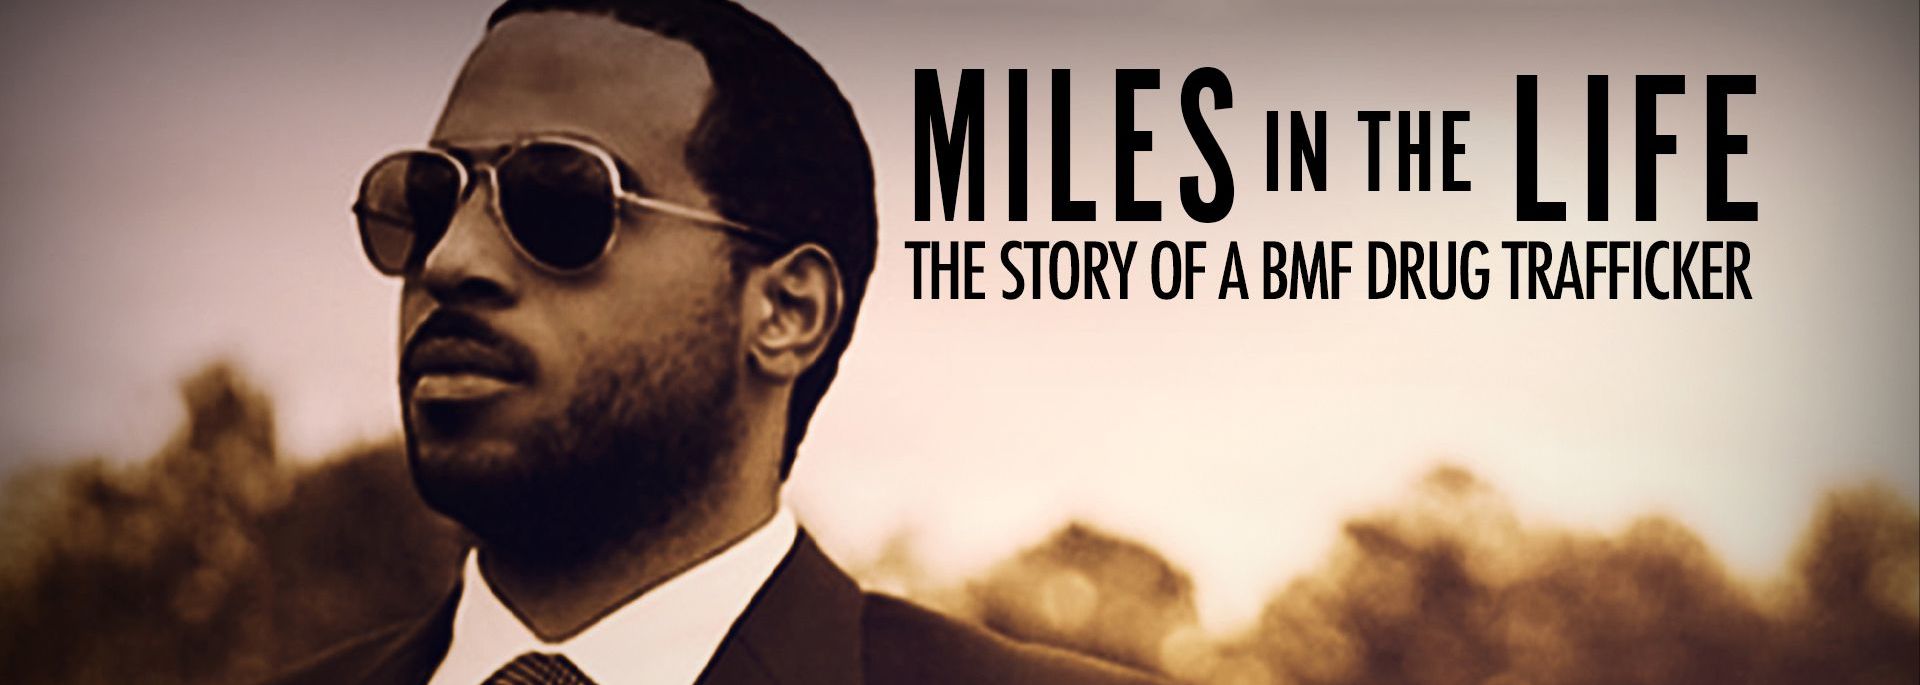 Miles in the Life - The Story of a BMF Drug Trafficker